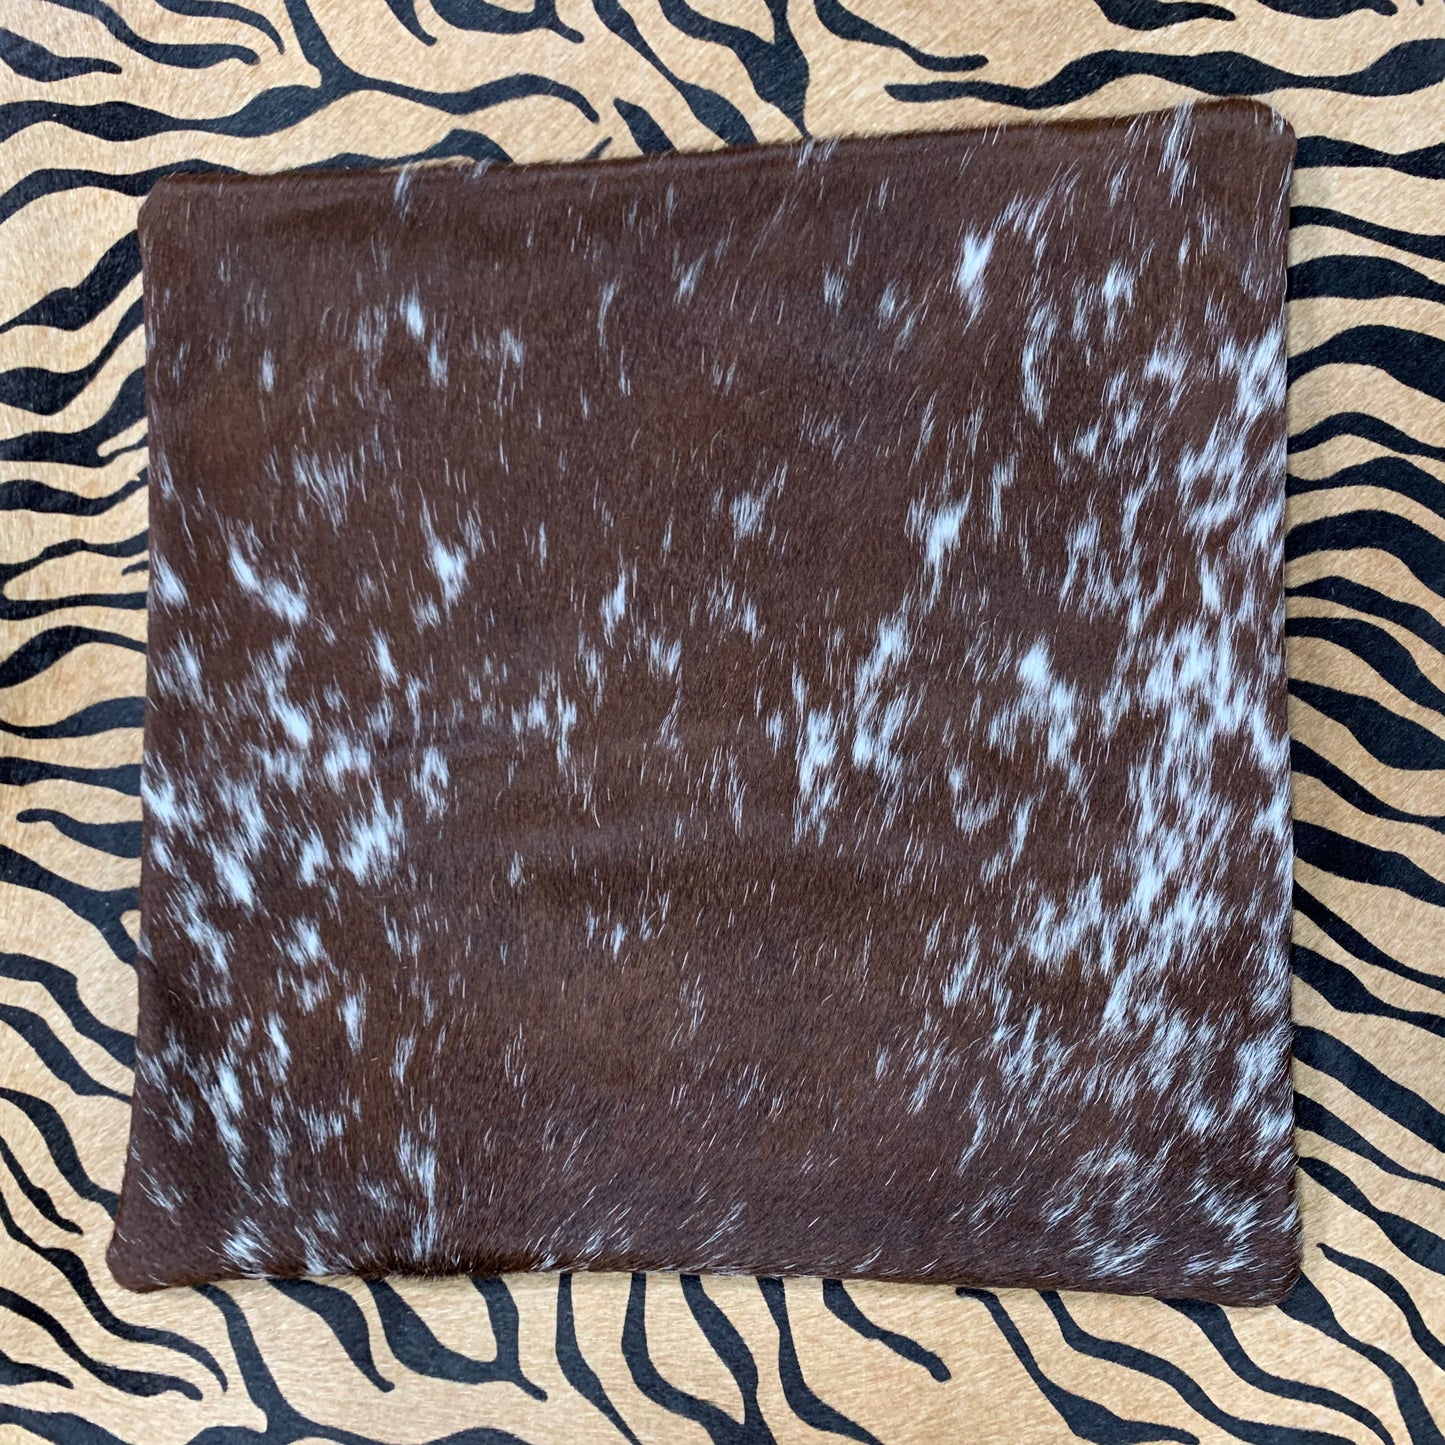 Cowhide Pillows Cushion Covers Leather Real Cow Hide Skin Patchwork 15.5" x 15.5"